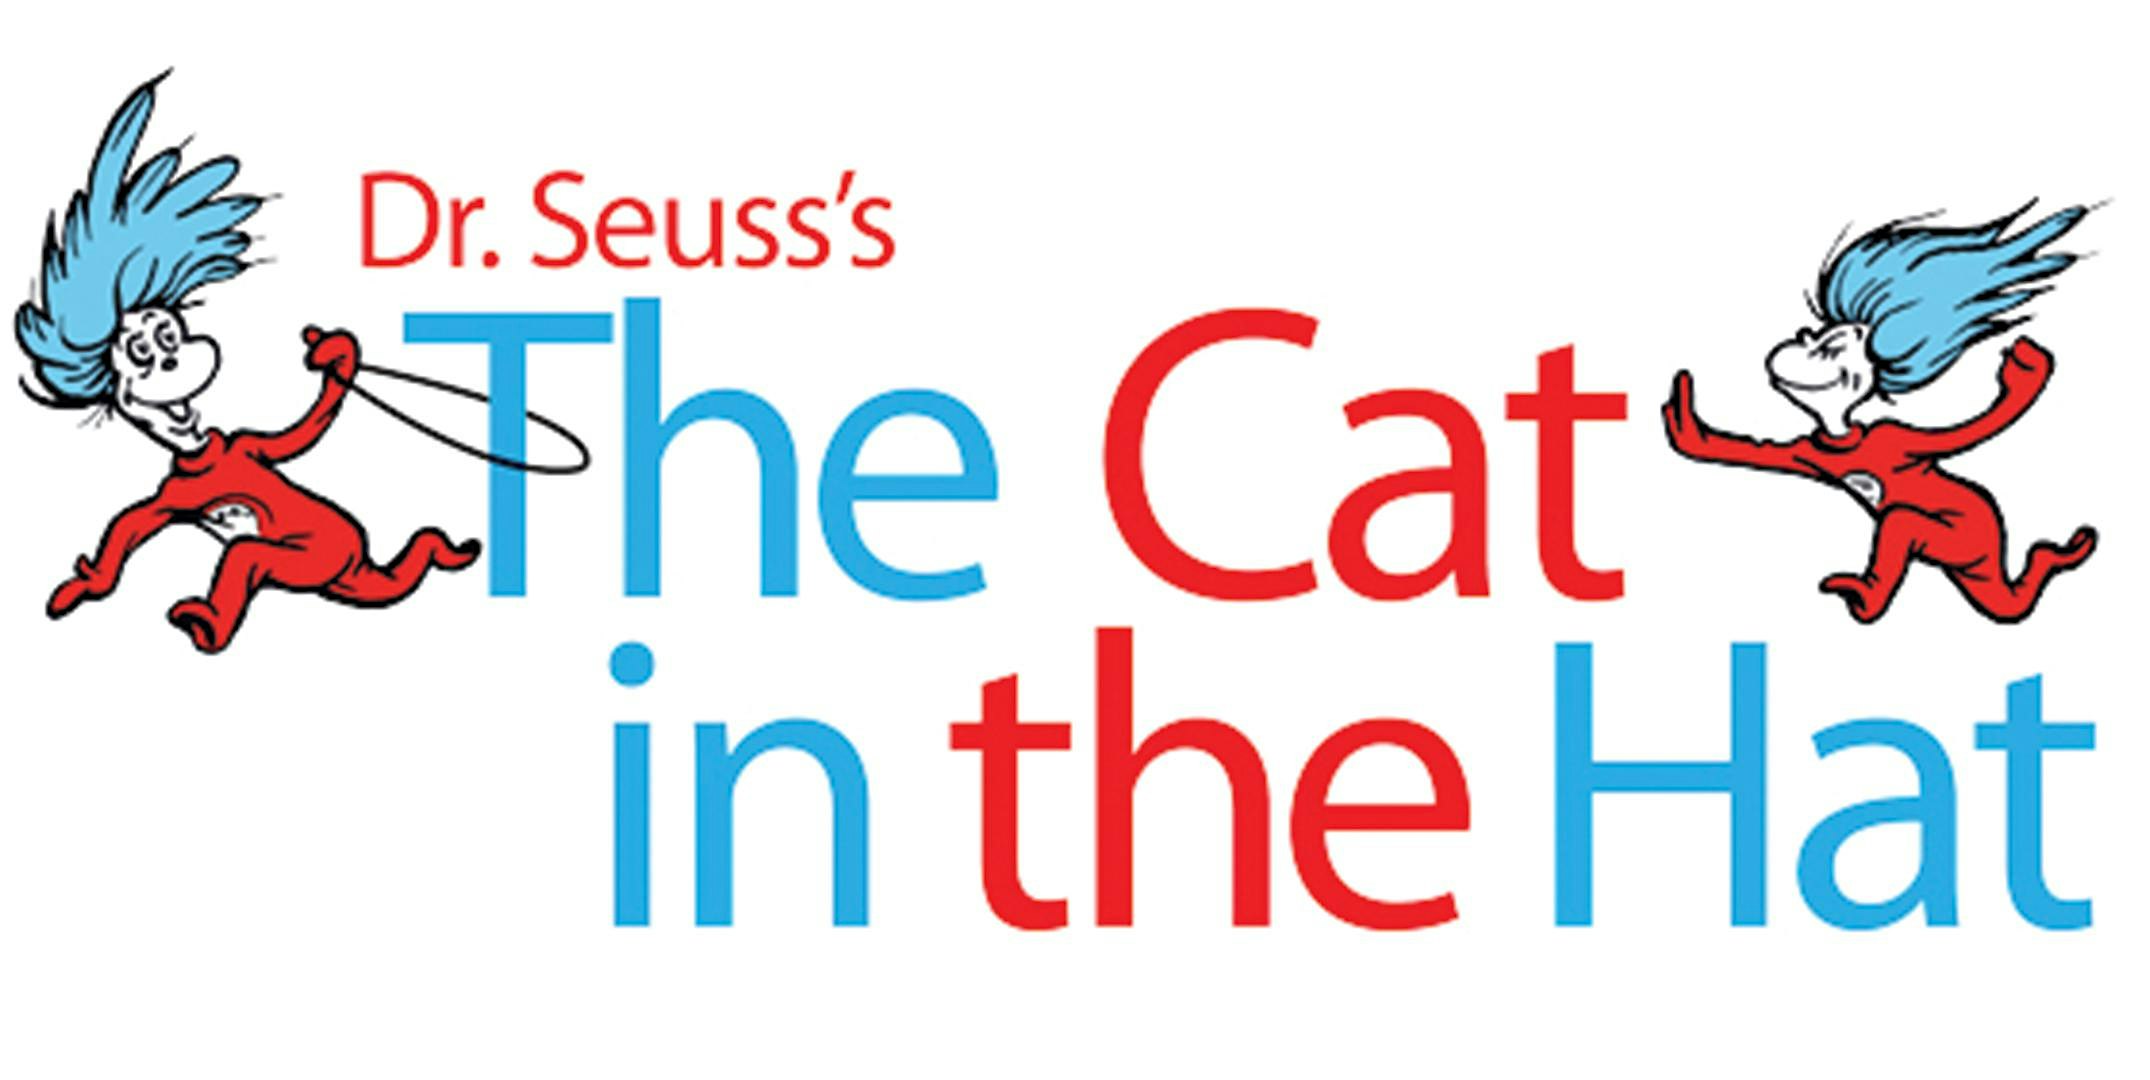 Dr. Seuss’s The Cat in the Hat – Sensory Friendly Performance